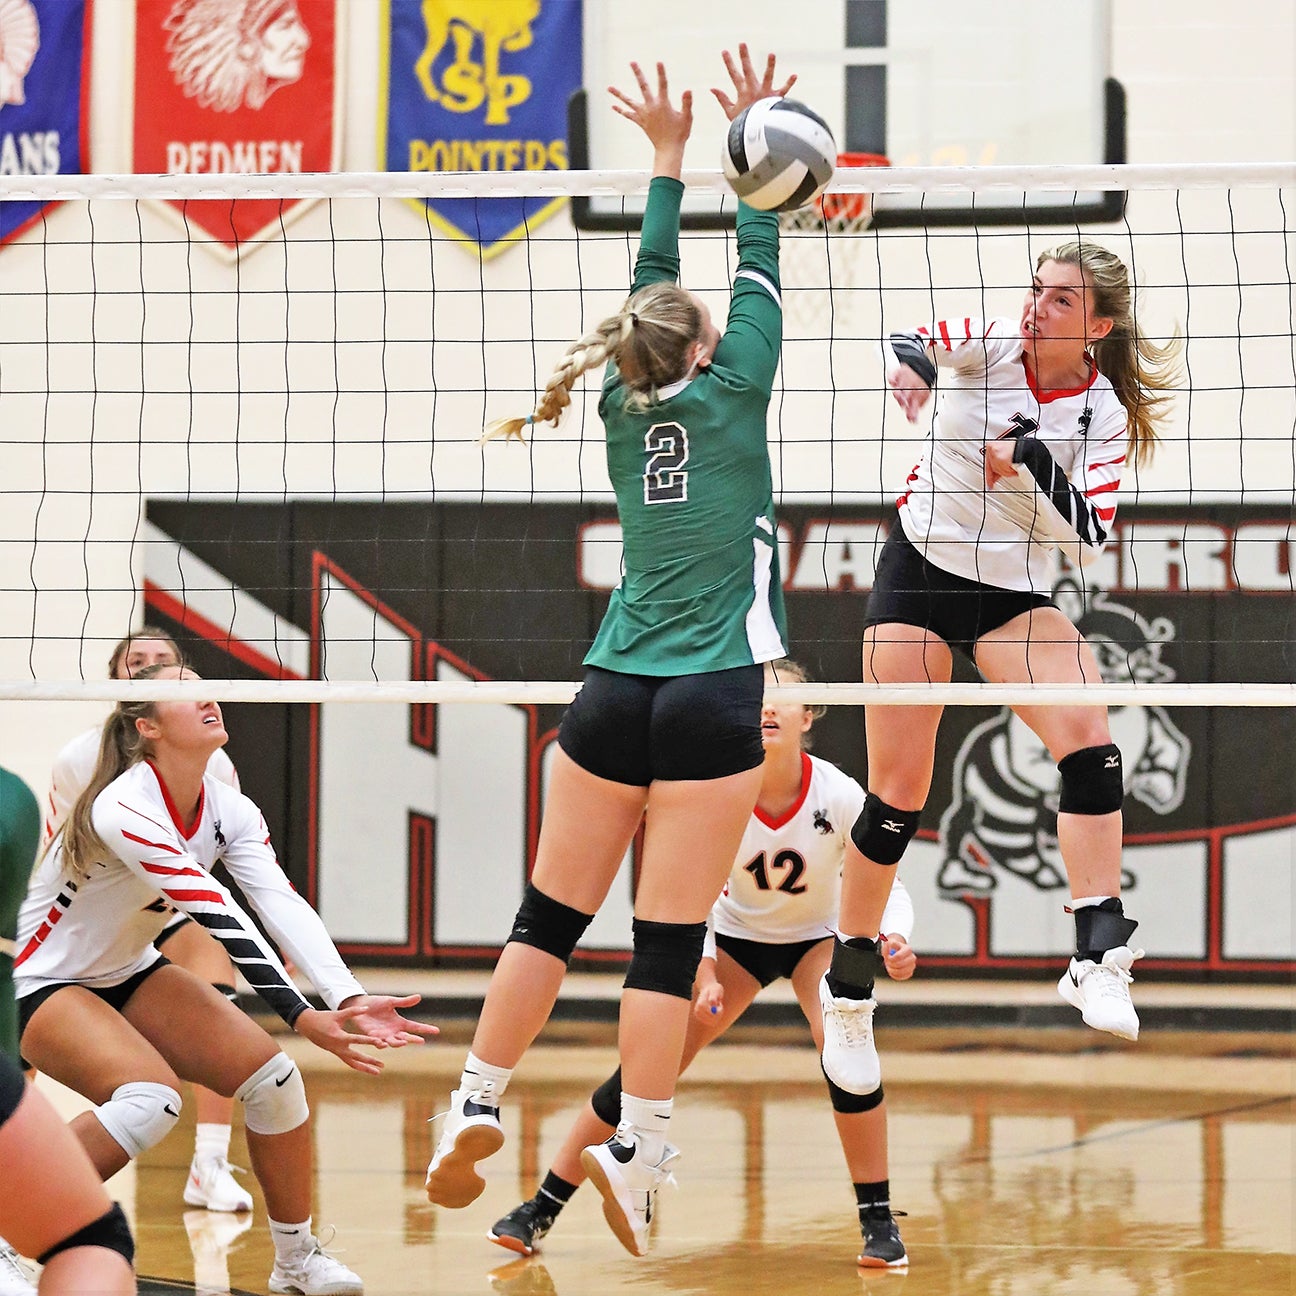 Lady Hornets on fire with win over Green - The Tribune | The Tribune